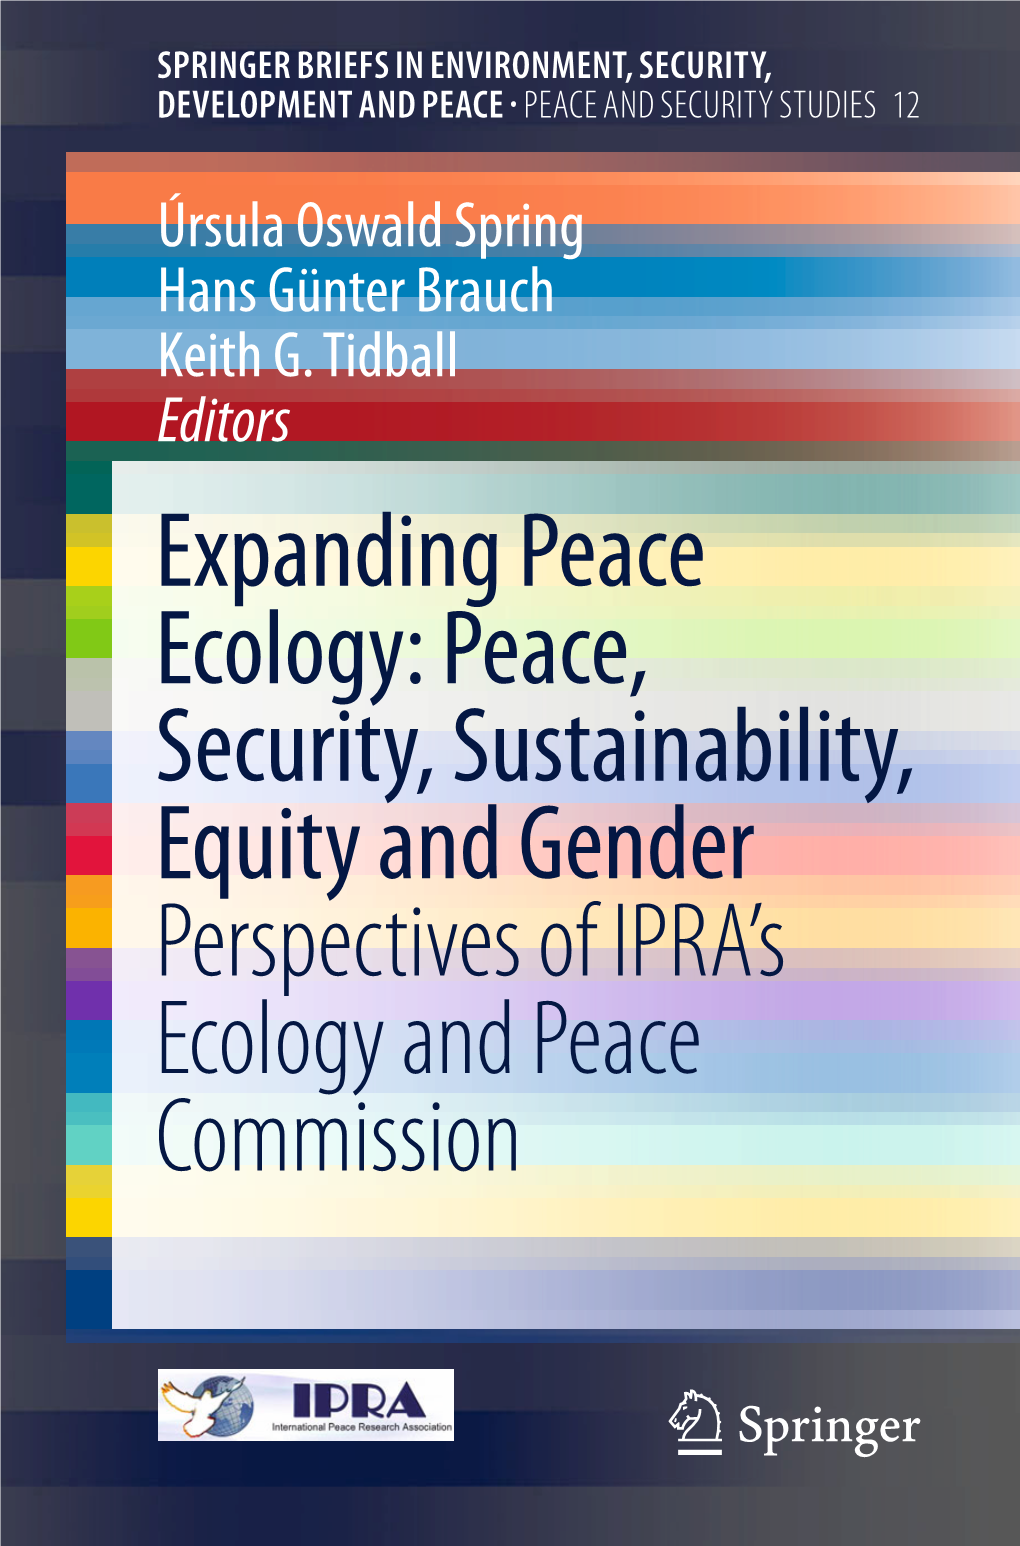 Peace, Security, Sustainability, Equity and Gender Perspectives of IPRA's